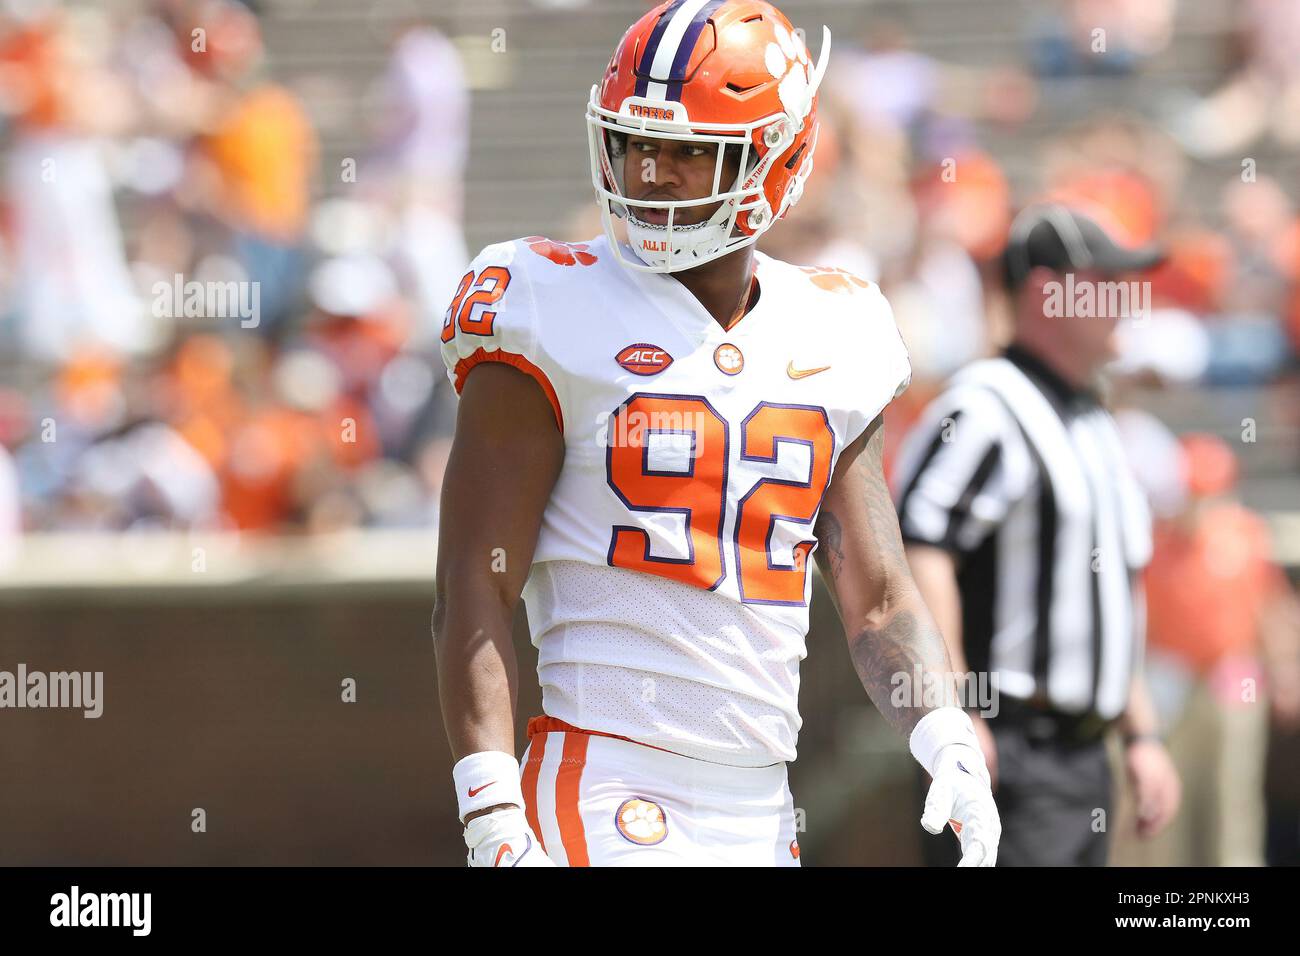 2015 Clemson Tigers football game-by-game